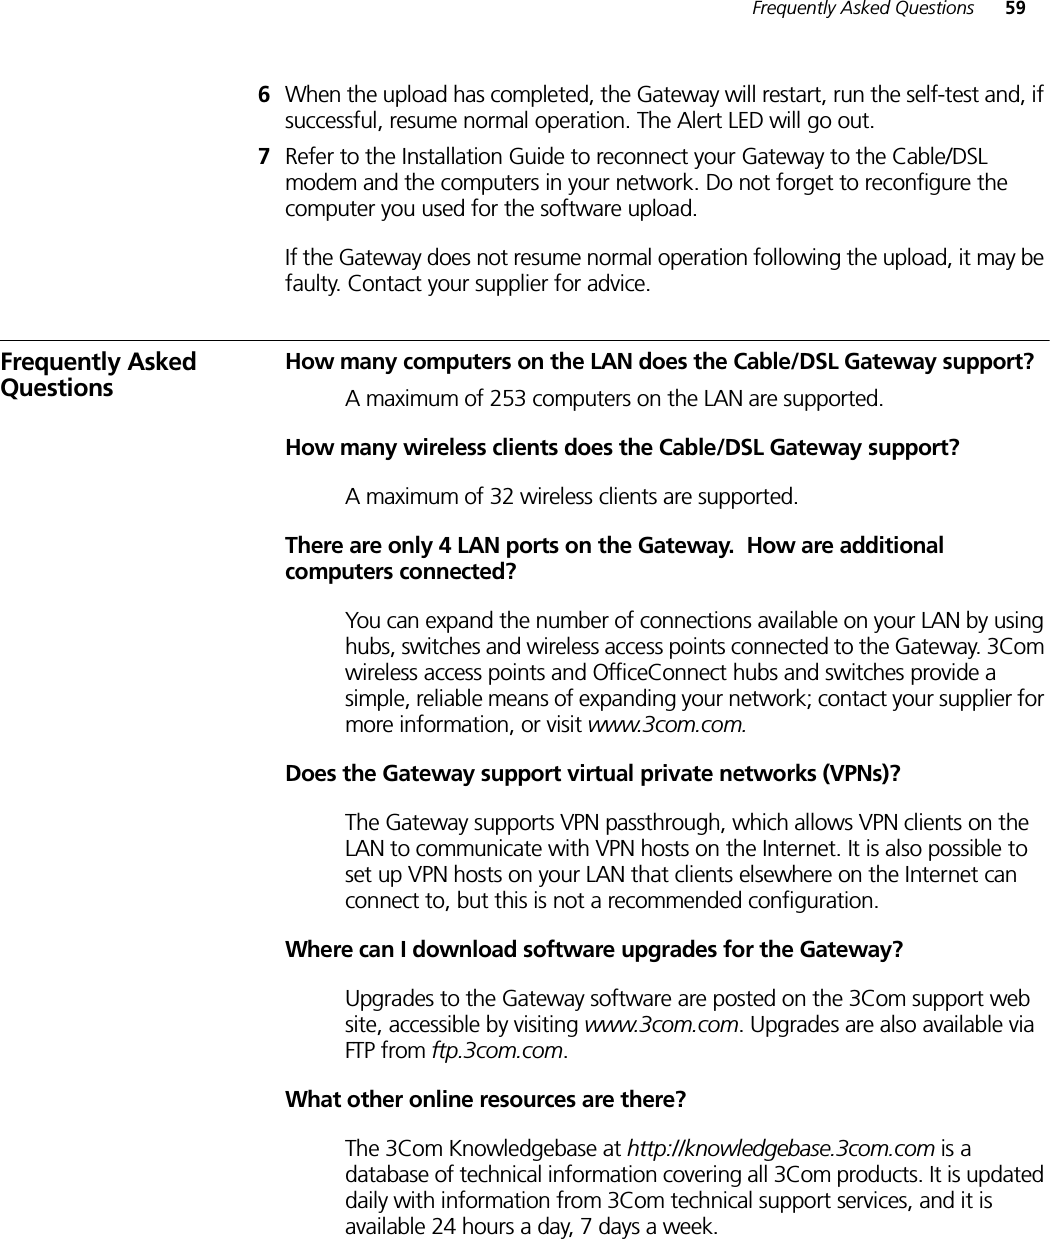 Frequently Asked Questions 596When the upload has completed, the Gateway will restart, run the self-test and, if successful, resume normal operation. The Alert LED will go out.7Refer to the Installation Guide to reconnect your Gateway to the Cable/DSL modem and the computers in your network. Do not forget to reconfigure the computer you used for the software upload.If the Gateway does not resume normal operation following the upload, it may be faulty. Contact your supplier for advice.Frequently Asked QuestionsHow many computers on the LAN does the Cable/DSL Gateway support?A maximum of 253 computers on the LAN are supported.How many wireless clients does the Cable/DSL Gateway support?A maximum of 32 wireless clients are supported.There are only 4 LAN ports on the Gateway.  How are additional computers connected?You can expand the number of connections available on your LAN by using hubs, switches and wireless access points connected to the Gateway. 3Com wireless access points and OfficeConnect hubs and switches provide a simple, reliable means of expanding your network; contact your supplier for more information, or visit www.3com.com.Does the Gateway support virtual private networks (VPNs)?The Gateway supports VPN passthrough, which allows VPN clients on the LAN to communicate with VPN hosts on the Internet. It is also possible to set up VPN hosts on your LAN that clients elsewhere on the Internet can connect to, but this is not a recommended configuration.Where can I download software upgrades for the Gateway?Upgrades to the Gateway software are posted on the 3Com support web site, accessible by visiting www.3com.com. Upgrades are also available via FTP from ftp.3com.com.What other online resources are there?The 3Com Knowledgebase at http://knowledgebase.3com.com is a database of technical information covering all 3Com products. It is updated daily with information from 3Com technical support services, and it is available 24 hours a day, 7 days a week.